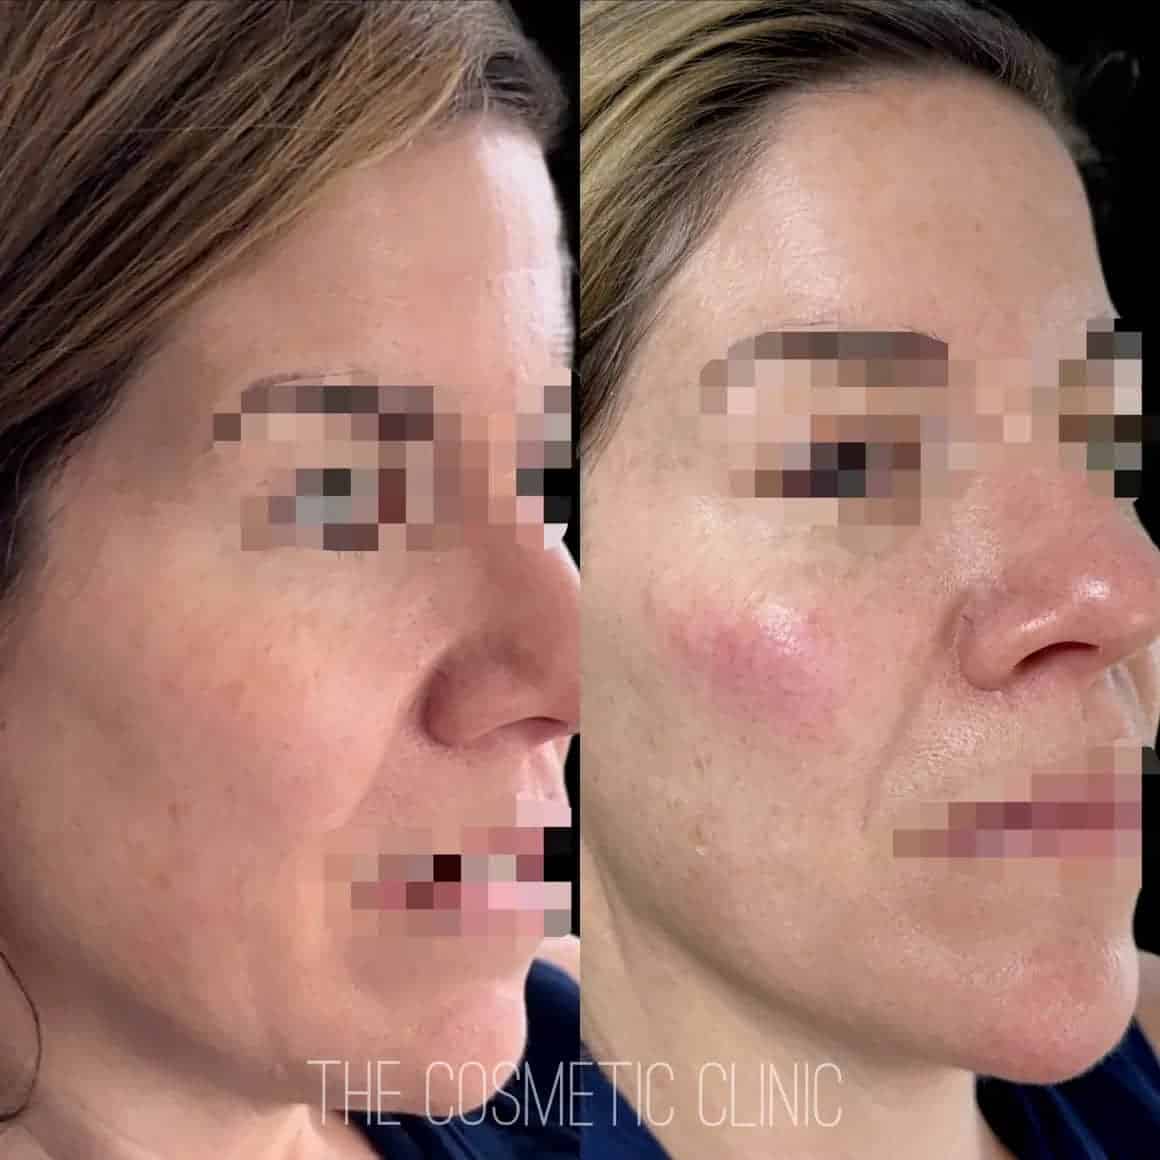 Woman Before and After Treatment photos | The Cosmetic Clinic in Greenwich, CT